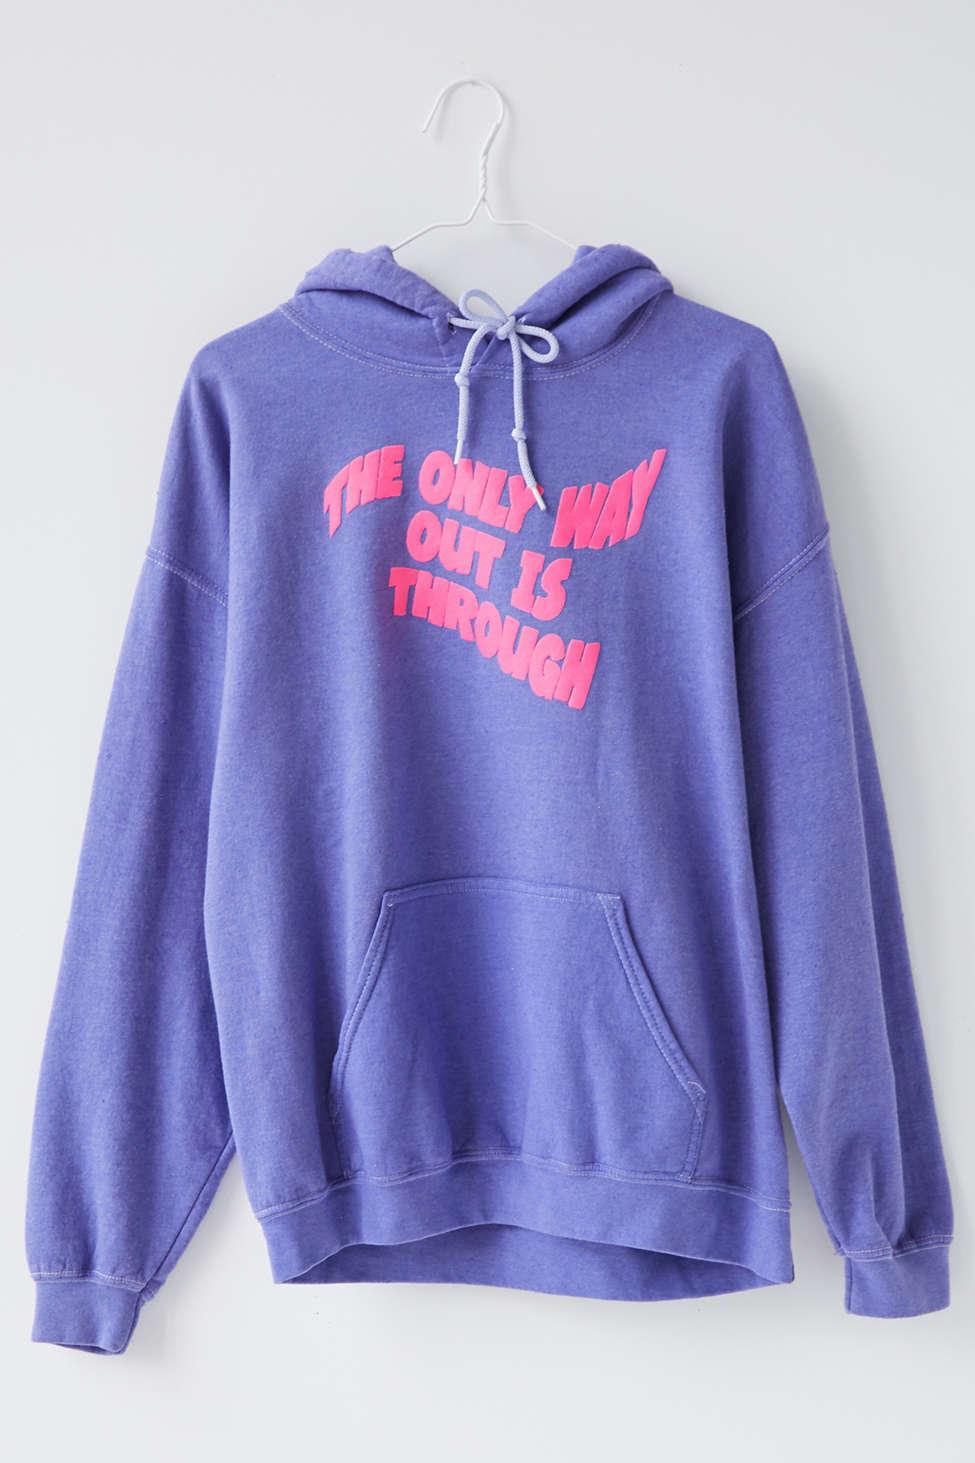 Urban Outfitters Cotton Puff Paint Oversized Hoodie Sweatshirt in Navy ...